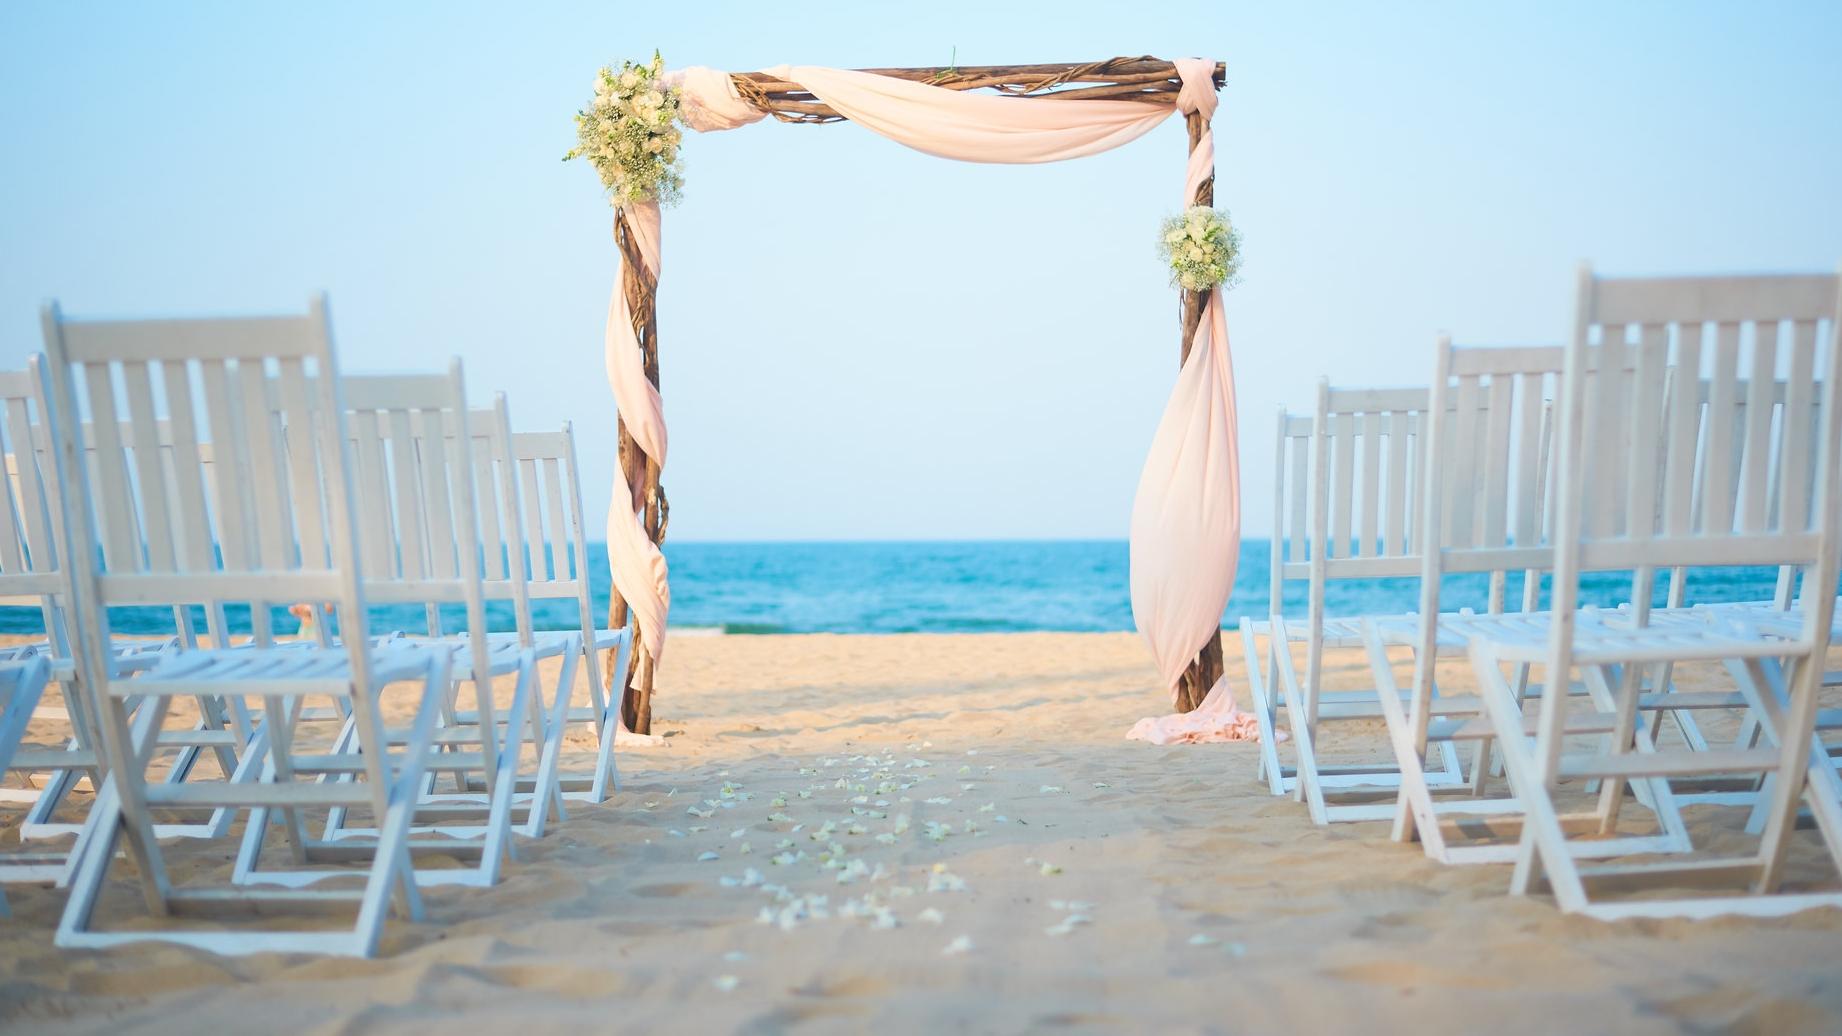 Beach Wedding Venues for Hire in Sydney